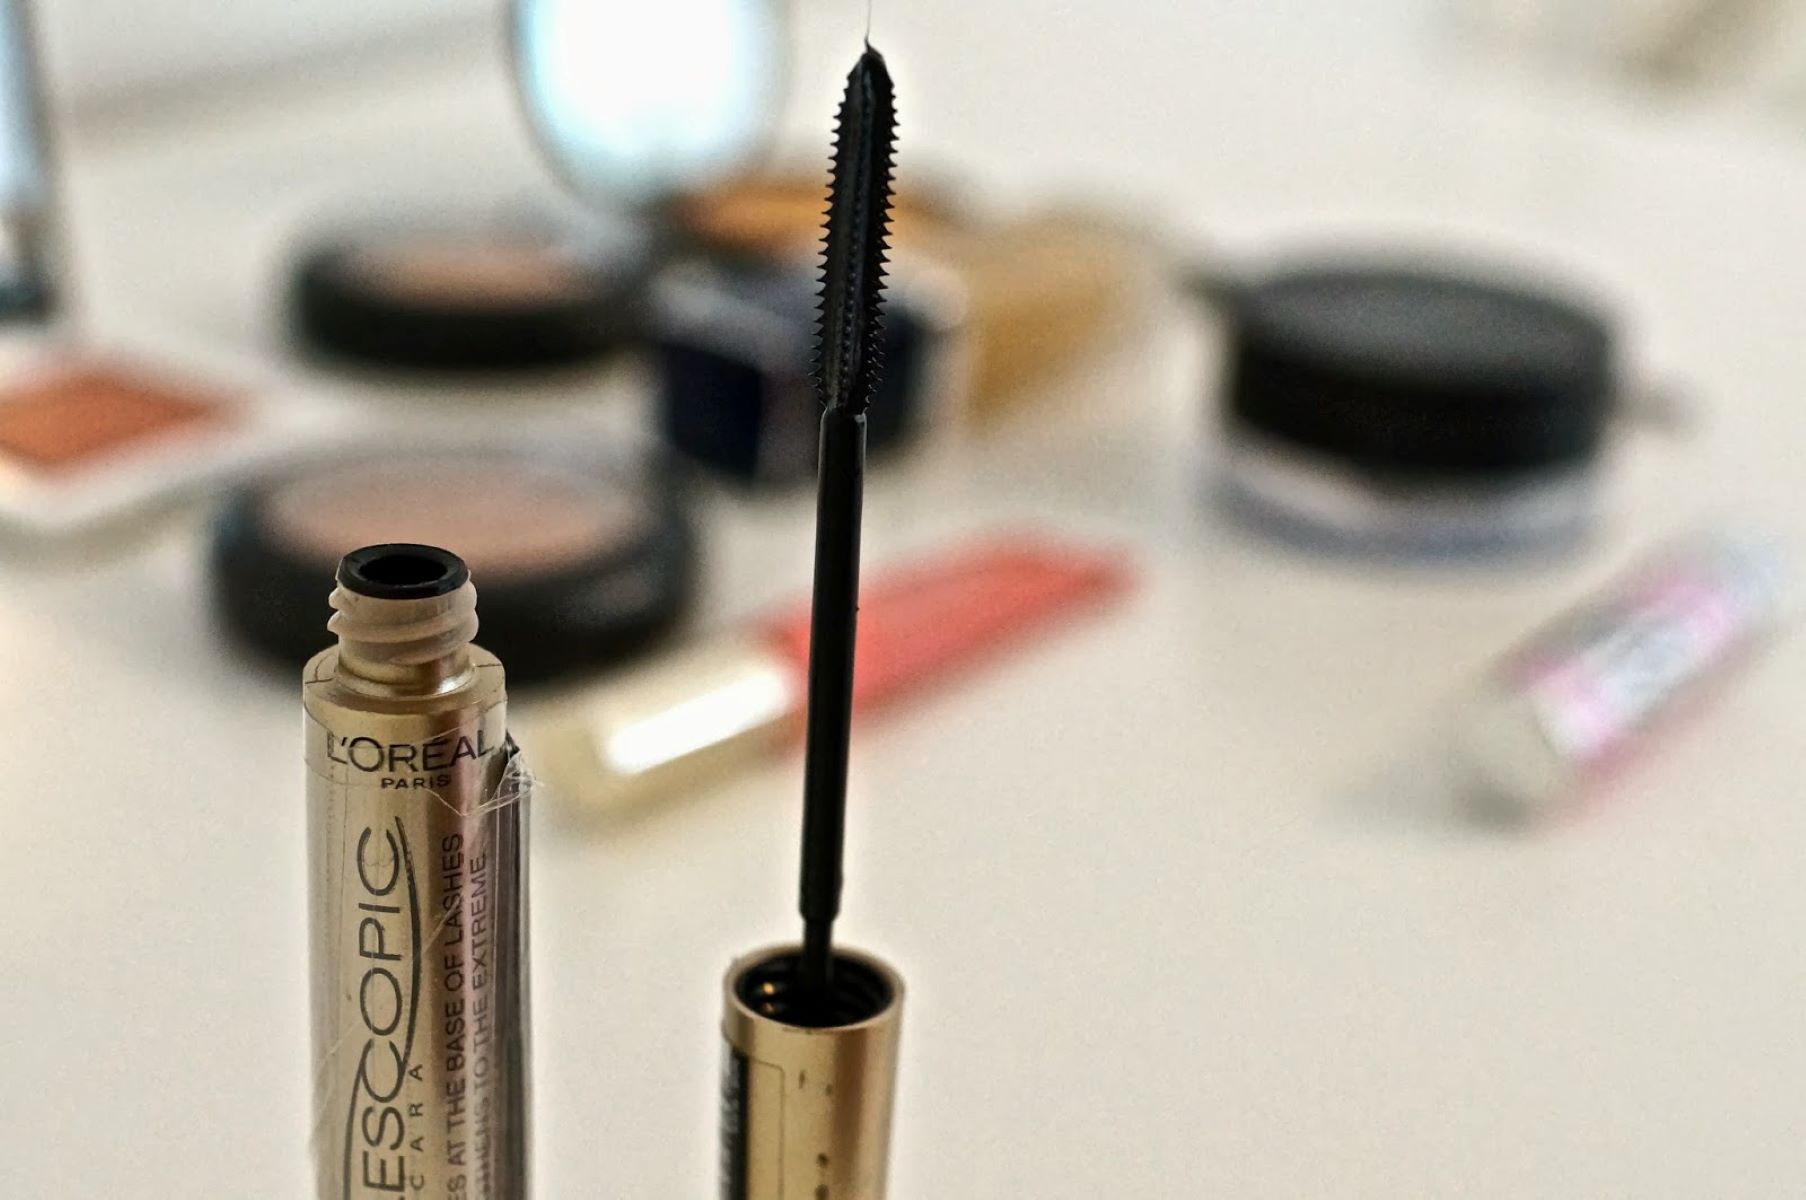 The L'Oréal Telescopic Mascara: What You Need To Know And The Best Alternatives